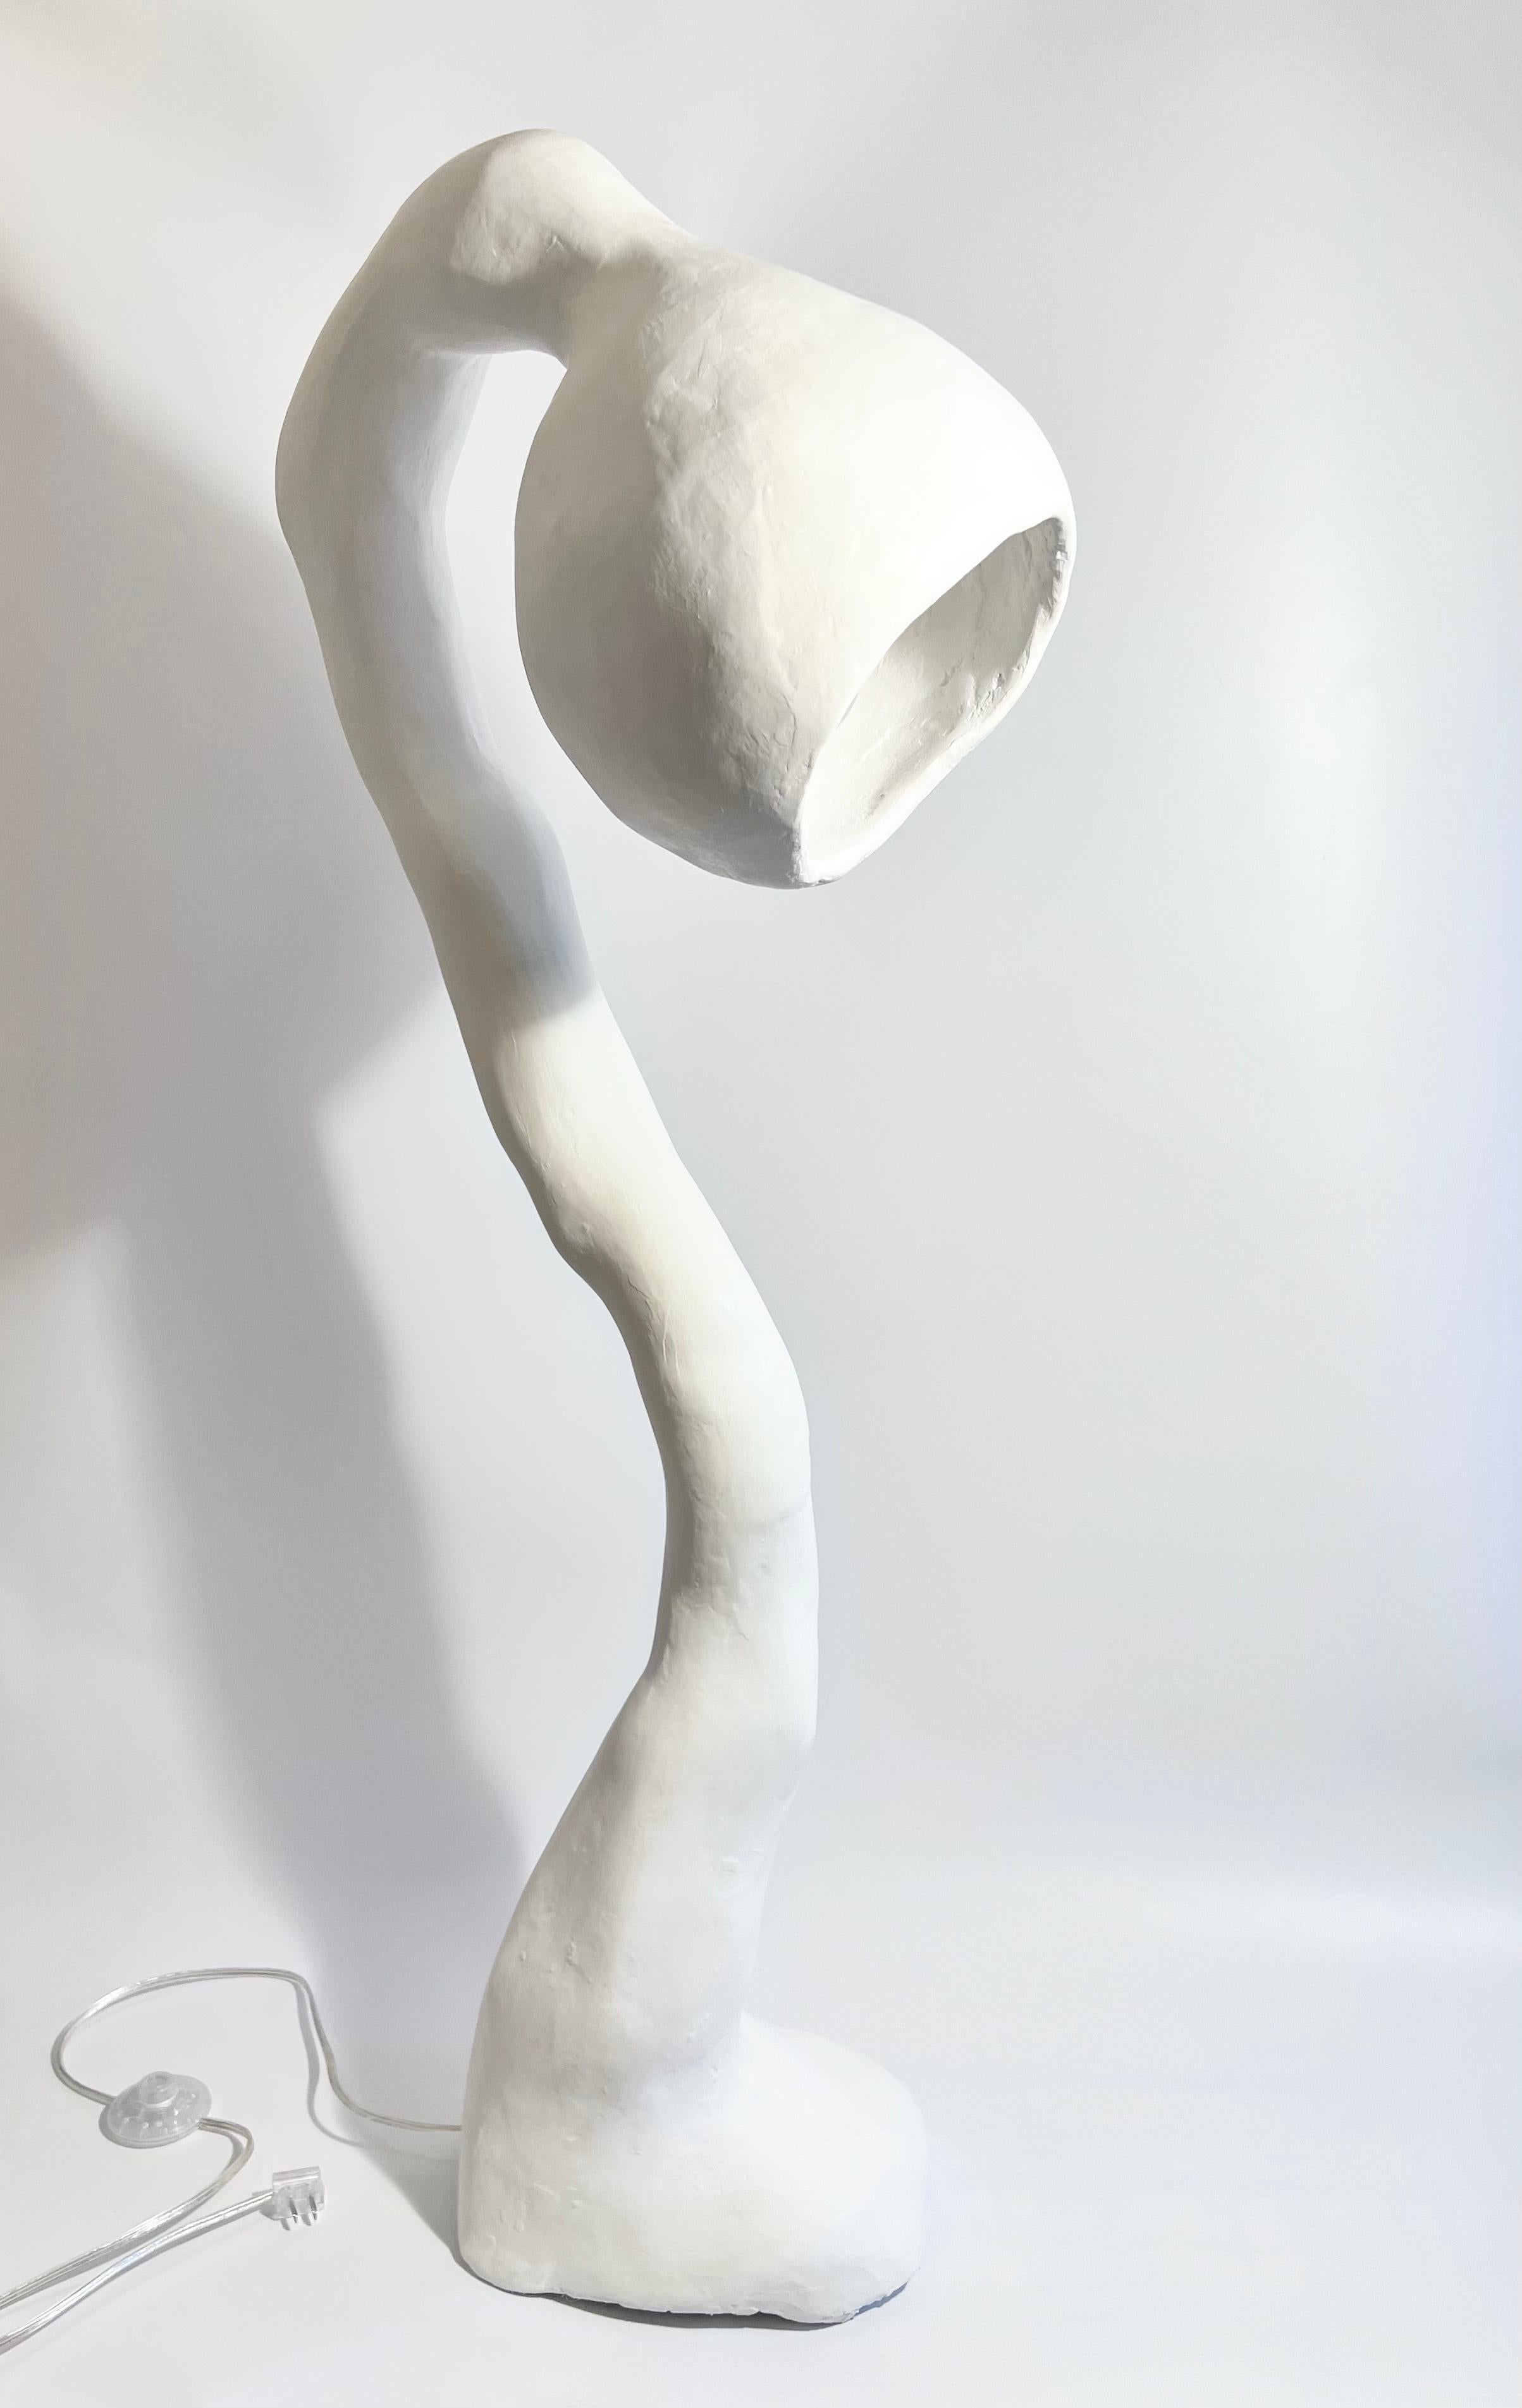 Carved Biomorphic Floor Lamp N.4 by Studio Chora, Standing Light, White Stone, In Stock For Sale